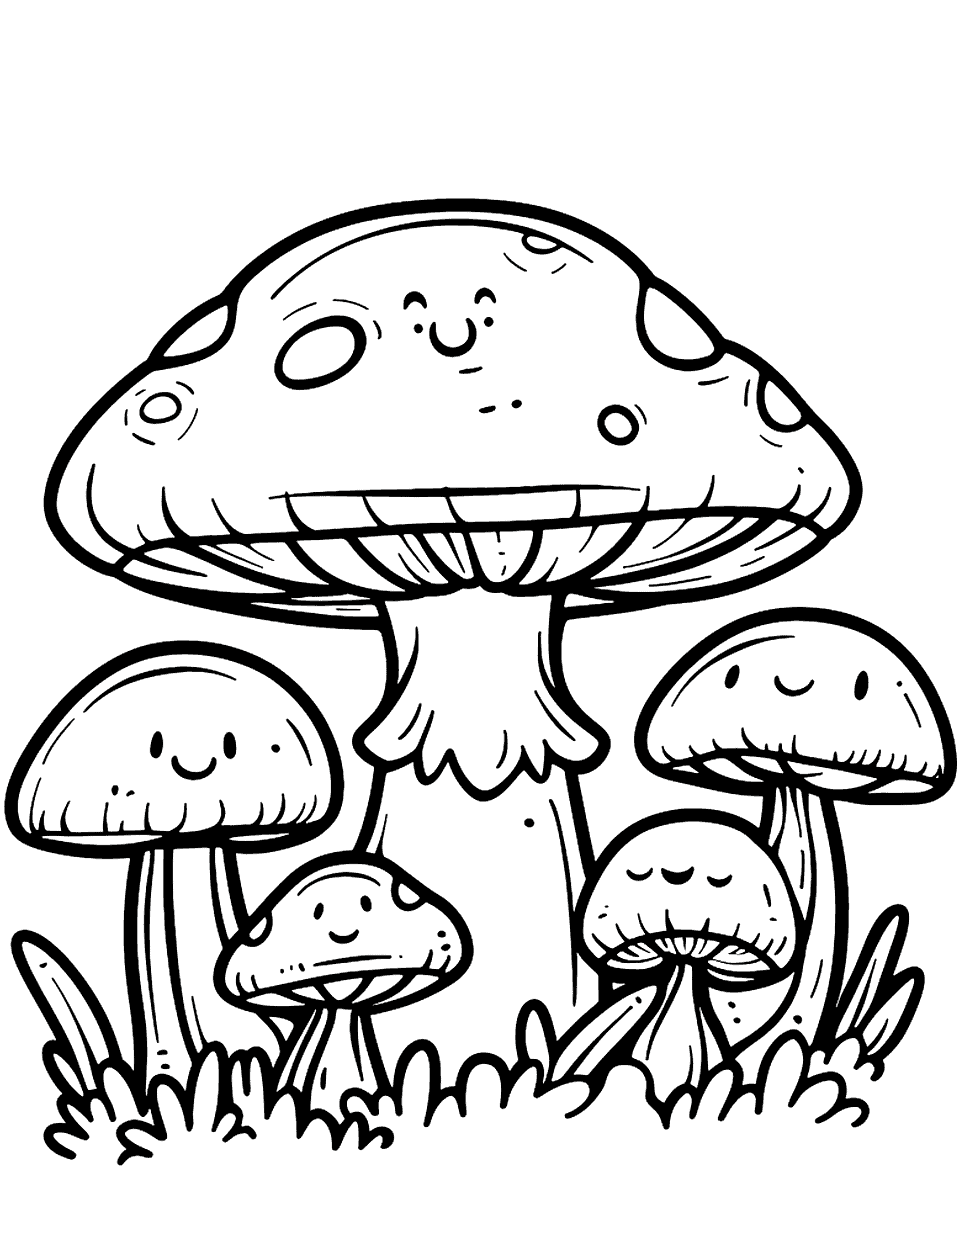 Cute Kawaii Mushroom Family Coloring Page - A group of small, smiling mushrooms with kawaii faces, close together.